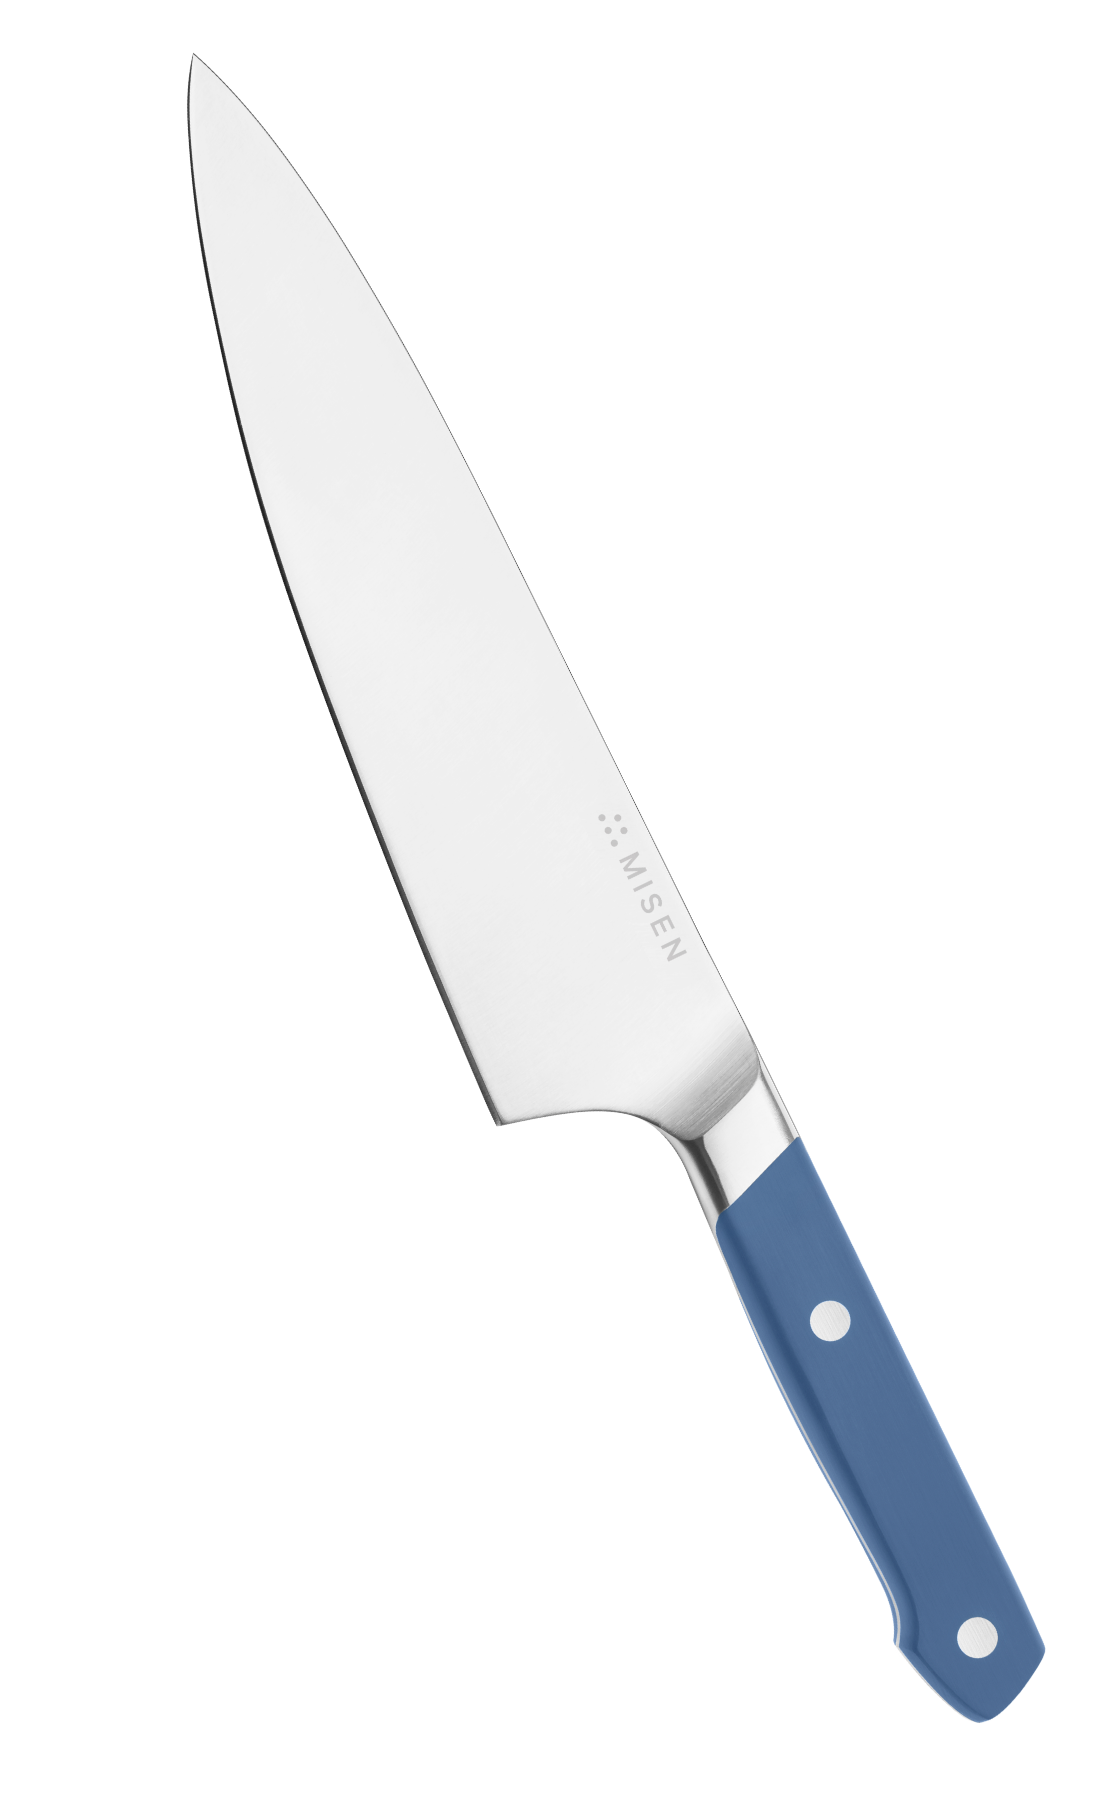 Shop now with your special discount for the Misen Chef's Knife!